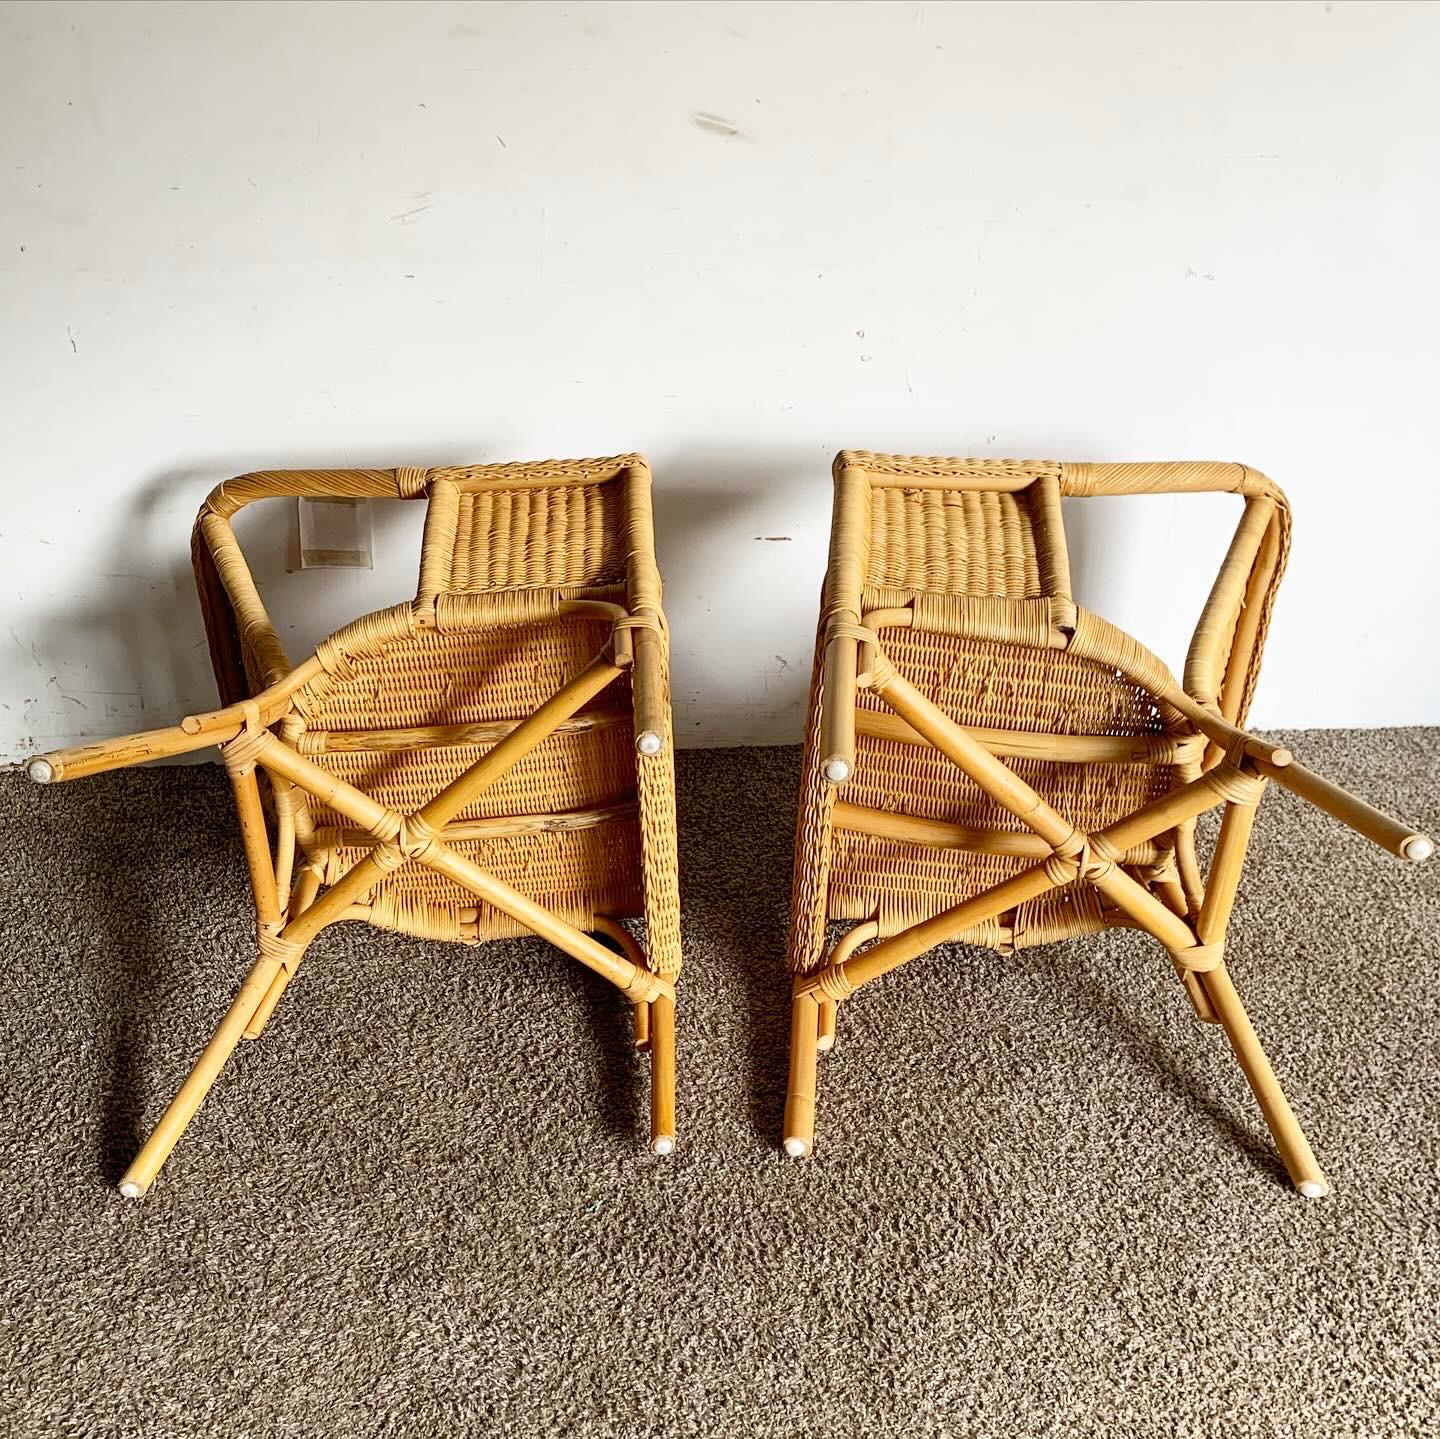 Boho Chic Wicker and Rattan Dining Arm Chairs - Set of 4 For Sale 1